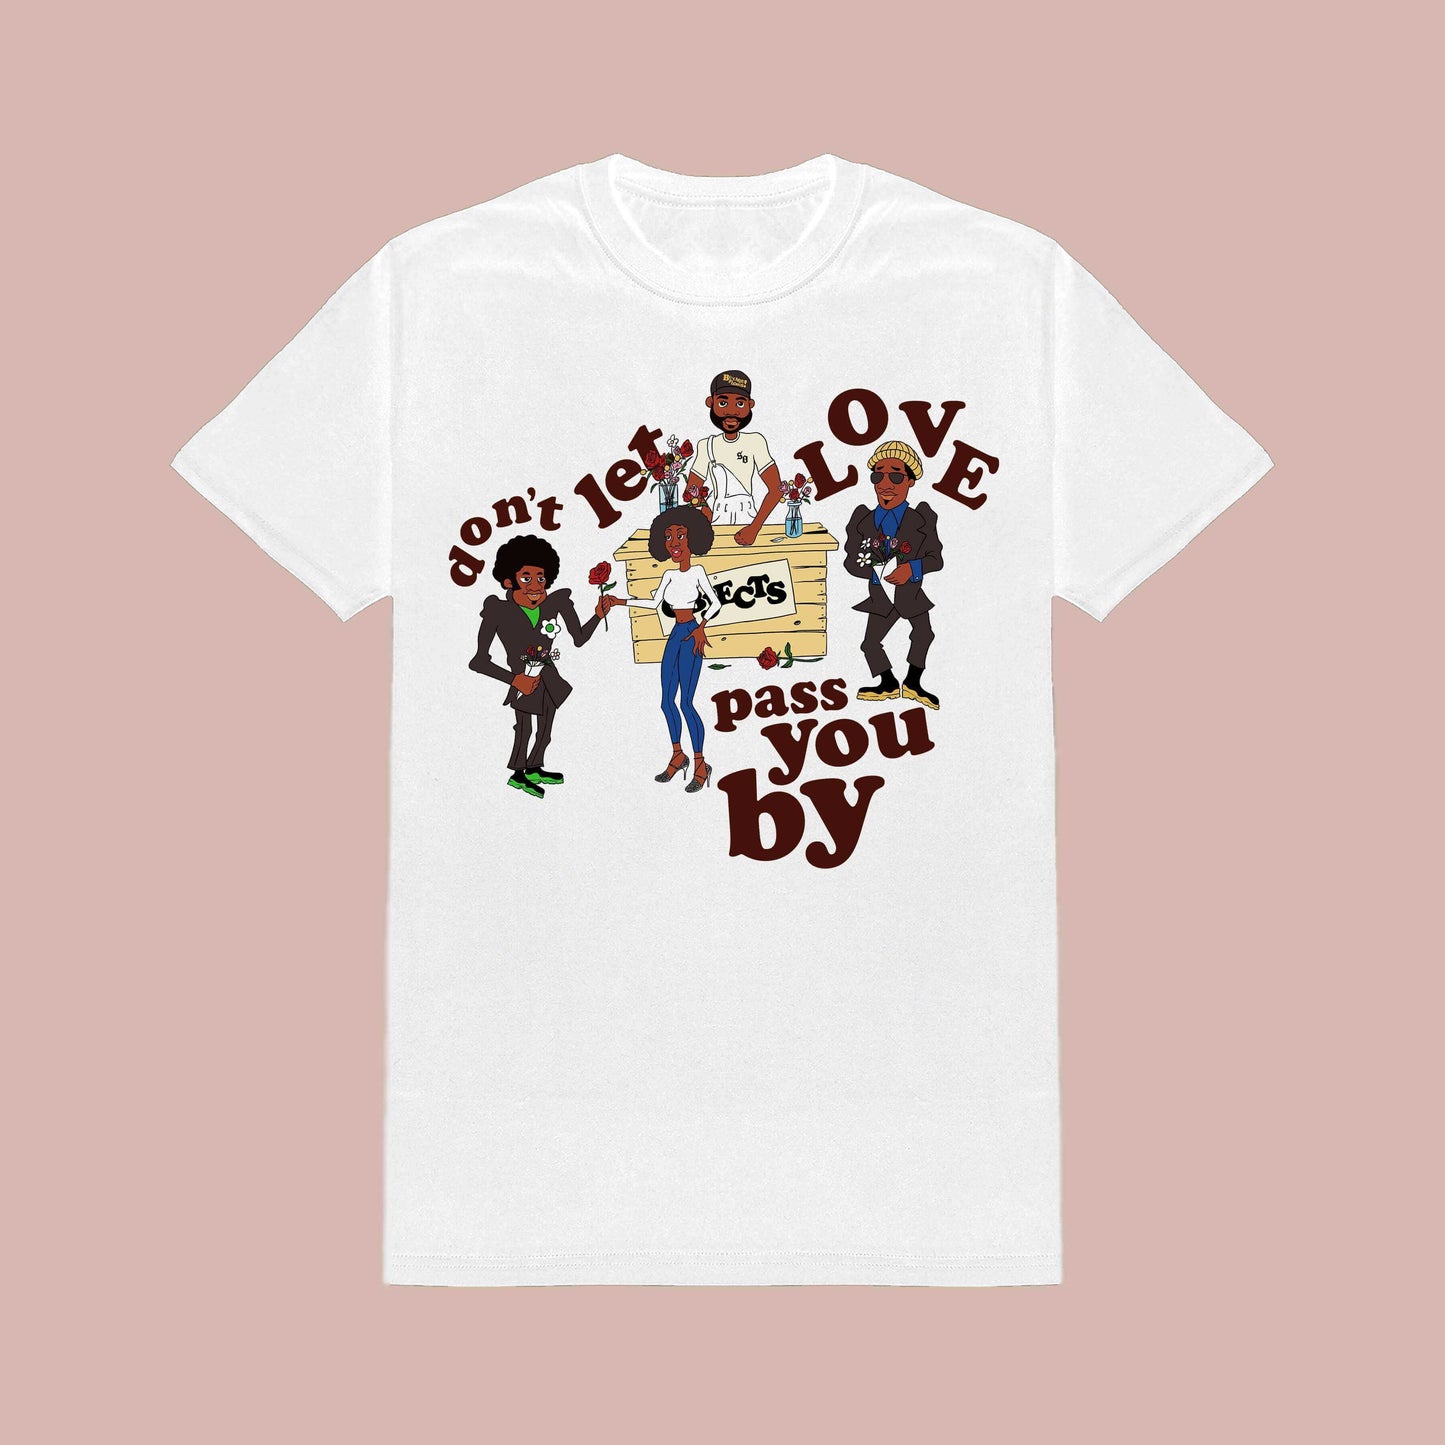 "Don't Let Love Pass You By" T-Shirt by Steven Othello